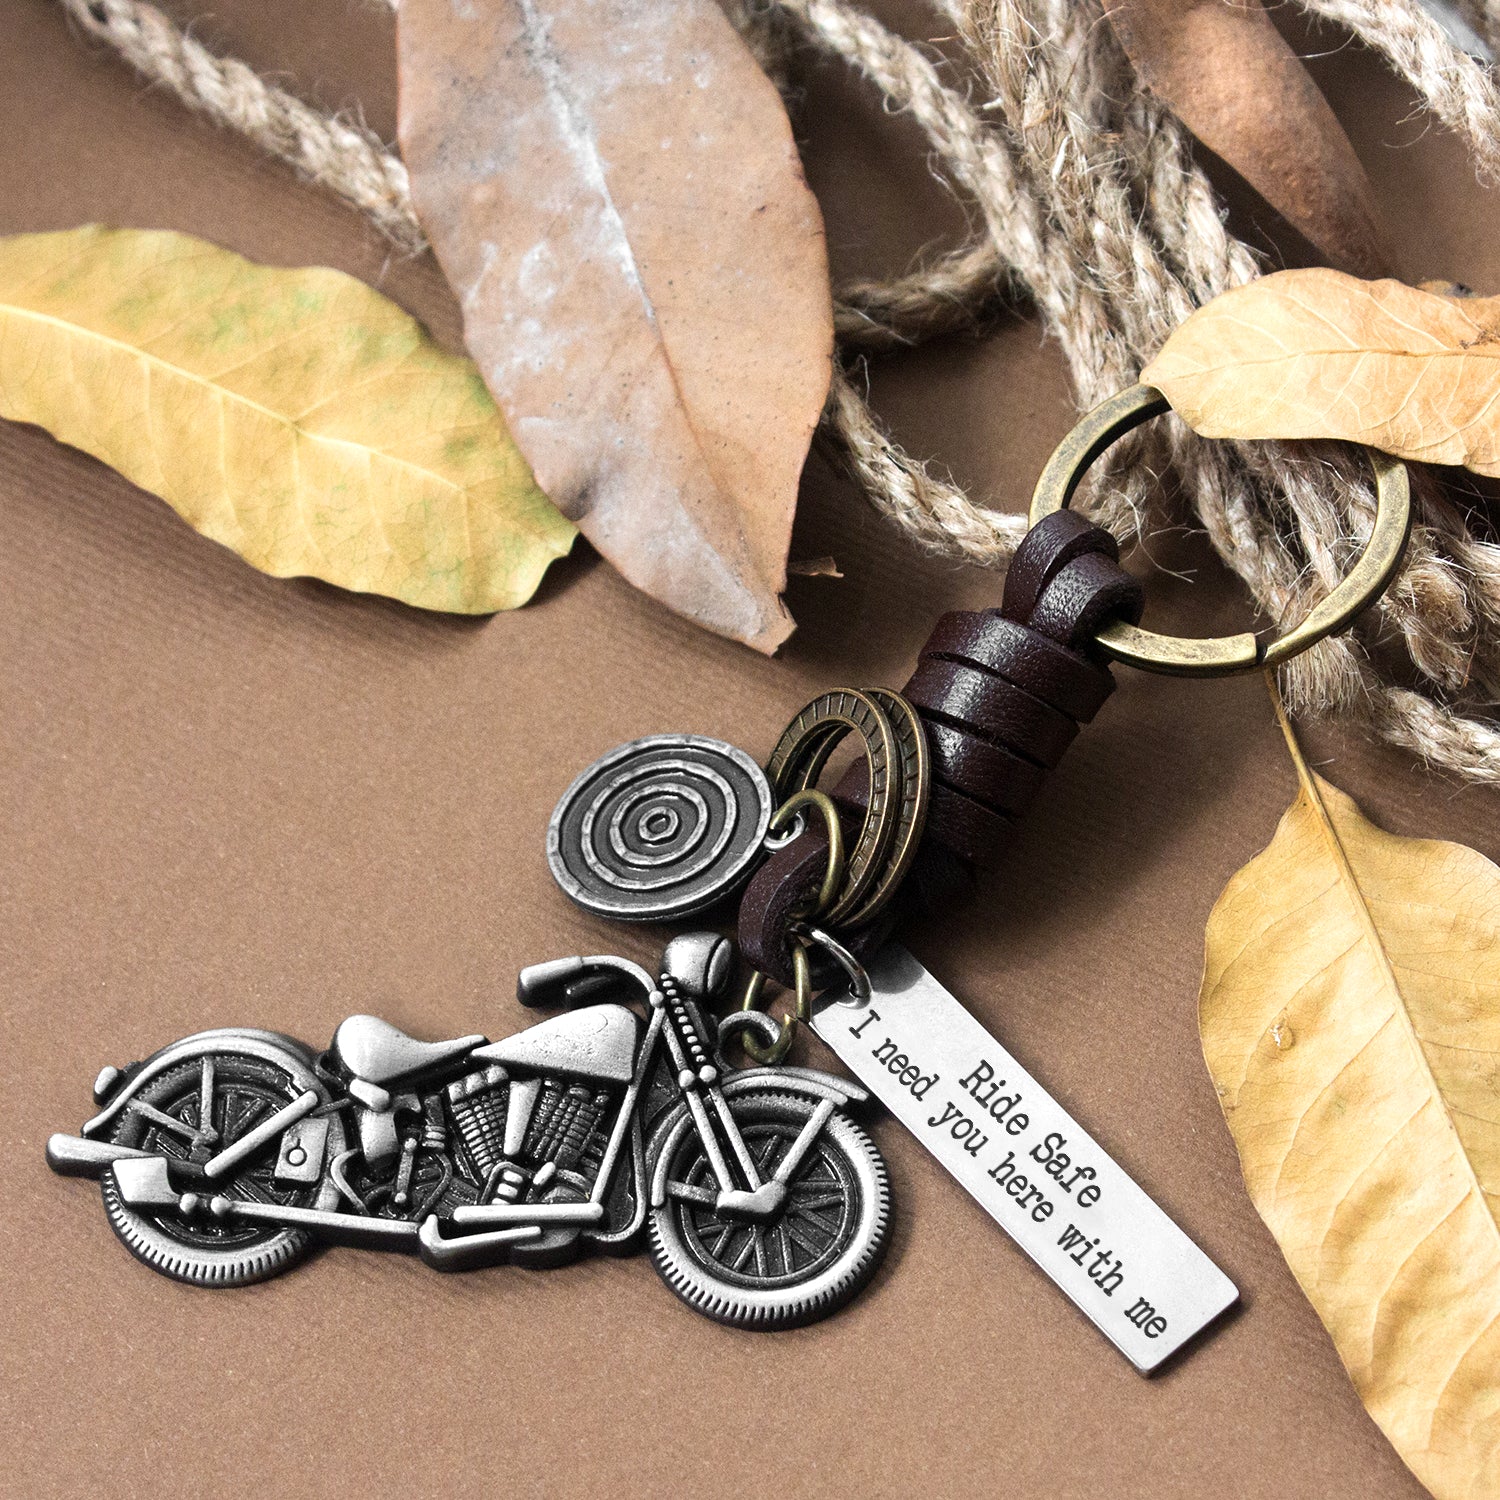 Motorcycle Keychain - To My Son - From Mom - You Will Always Be My Lit -  Wrapsify